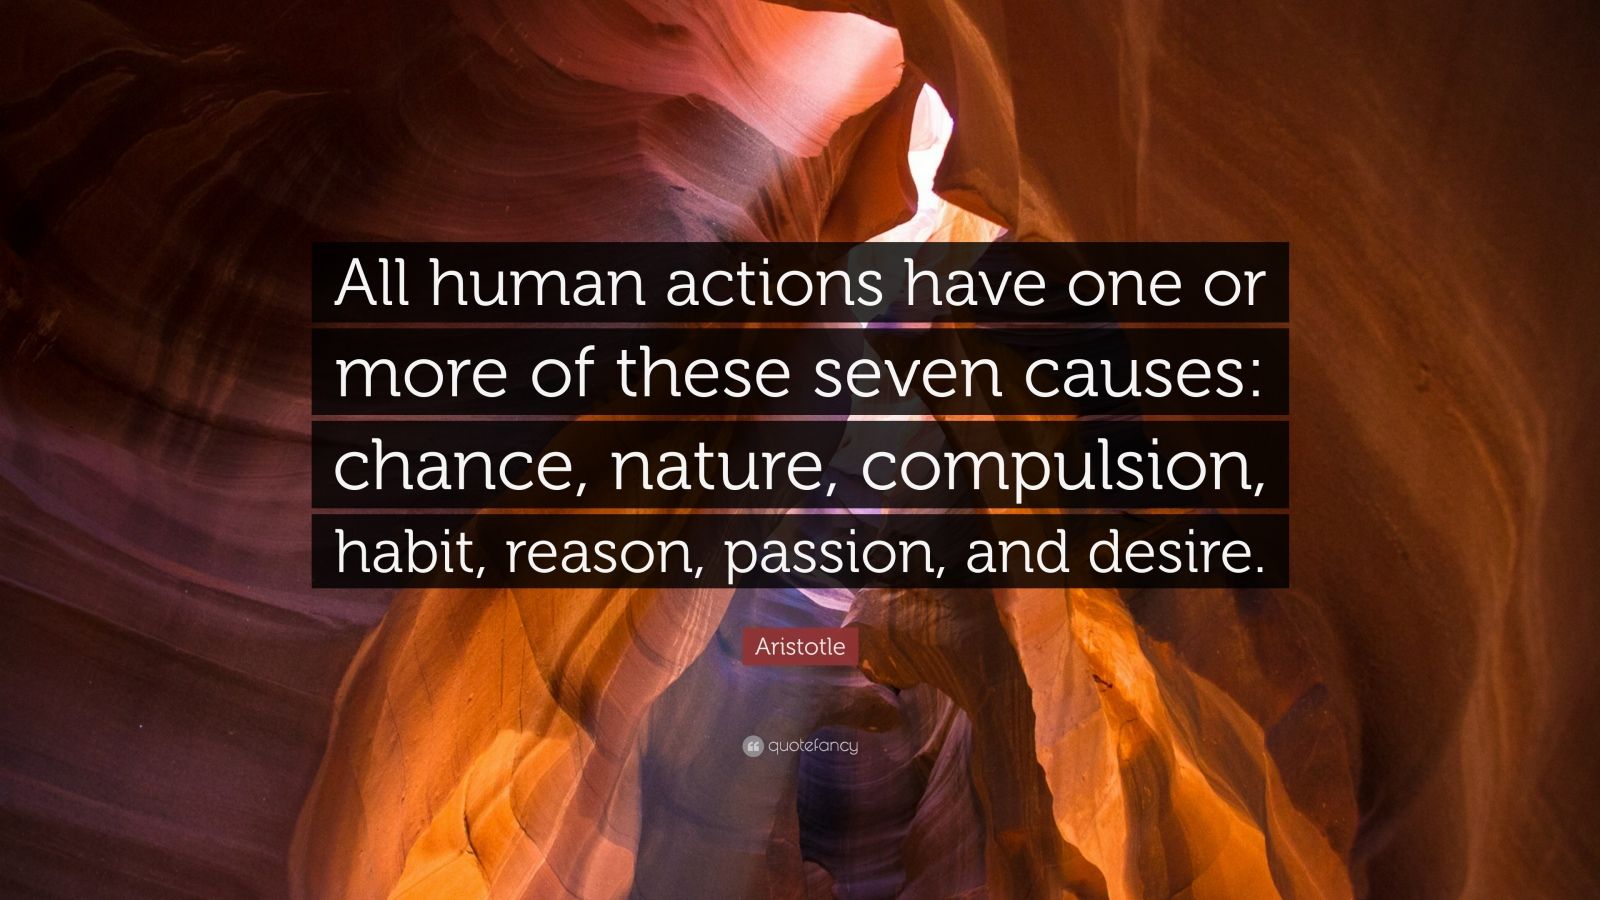 Aristotle Quote “All human actions have one or more of these seven causes